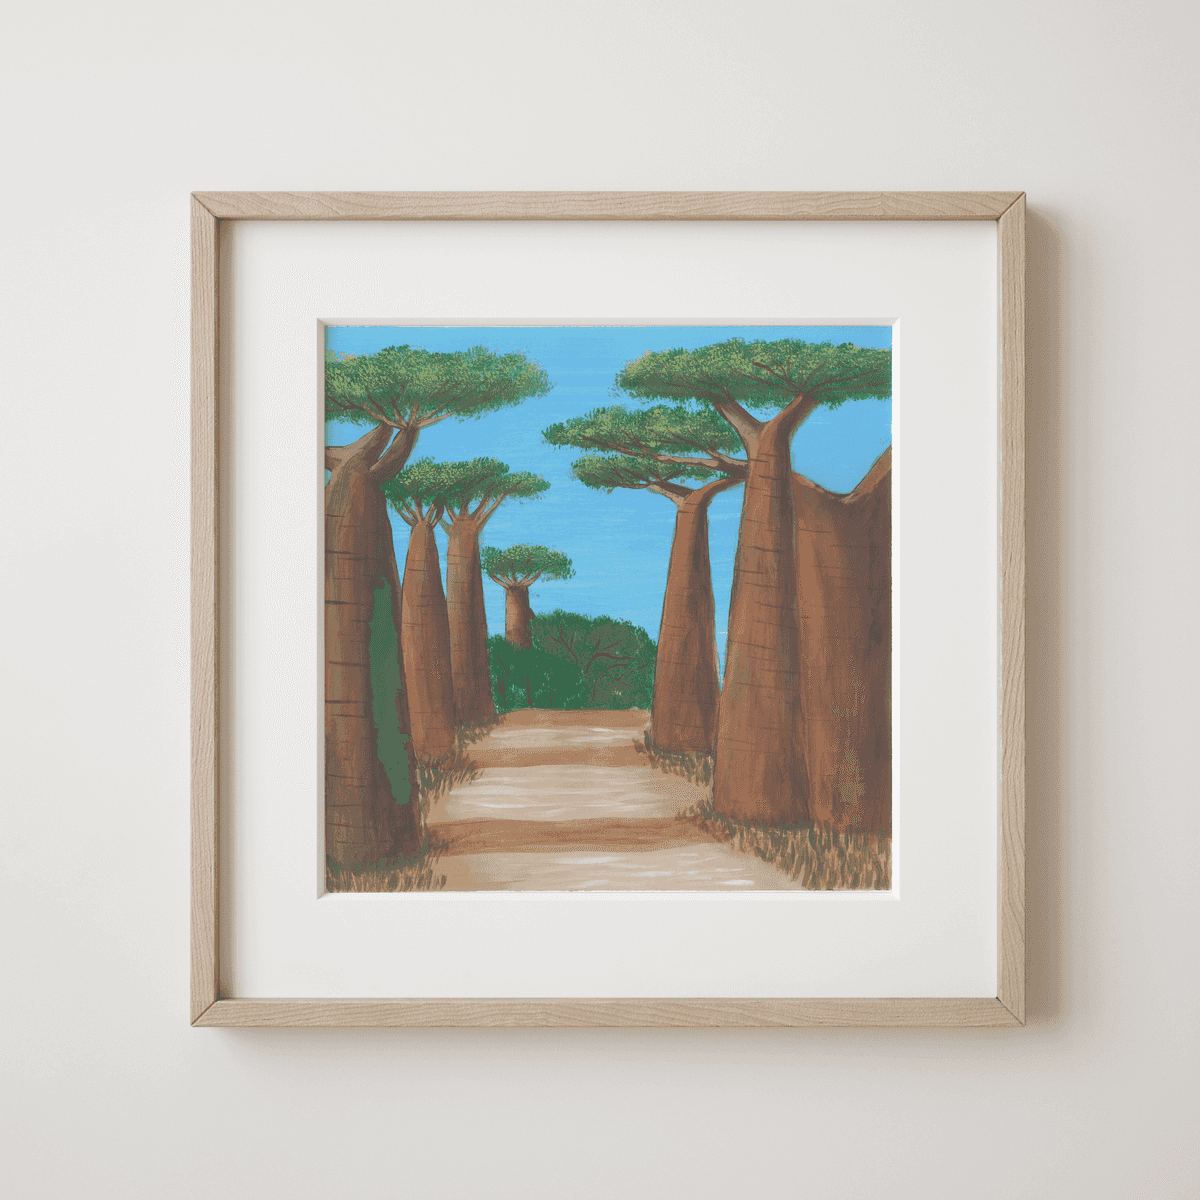 Nature and wildlife sounds – dawn in the South African bush - Pathway Under the Baobab Sentinels Fine Art Print - nature soundscape art - earth.fm